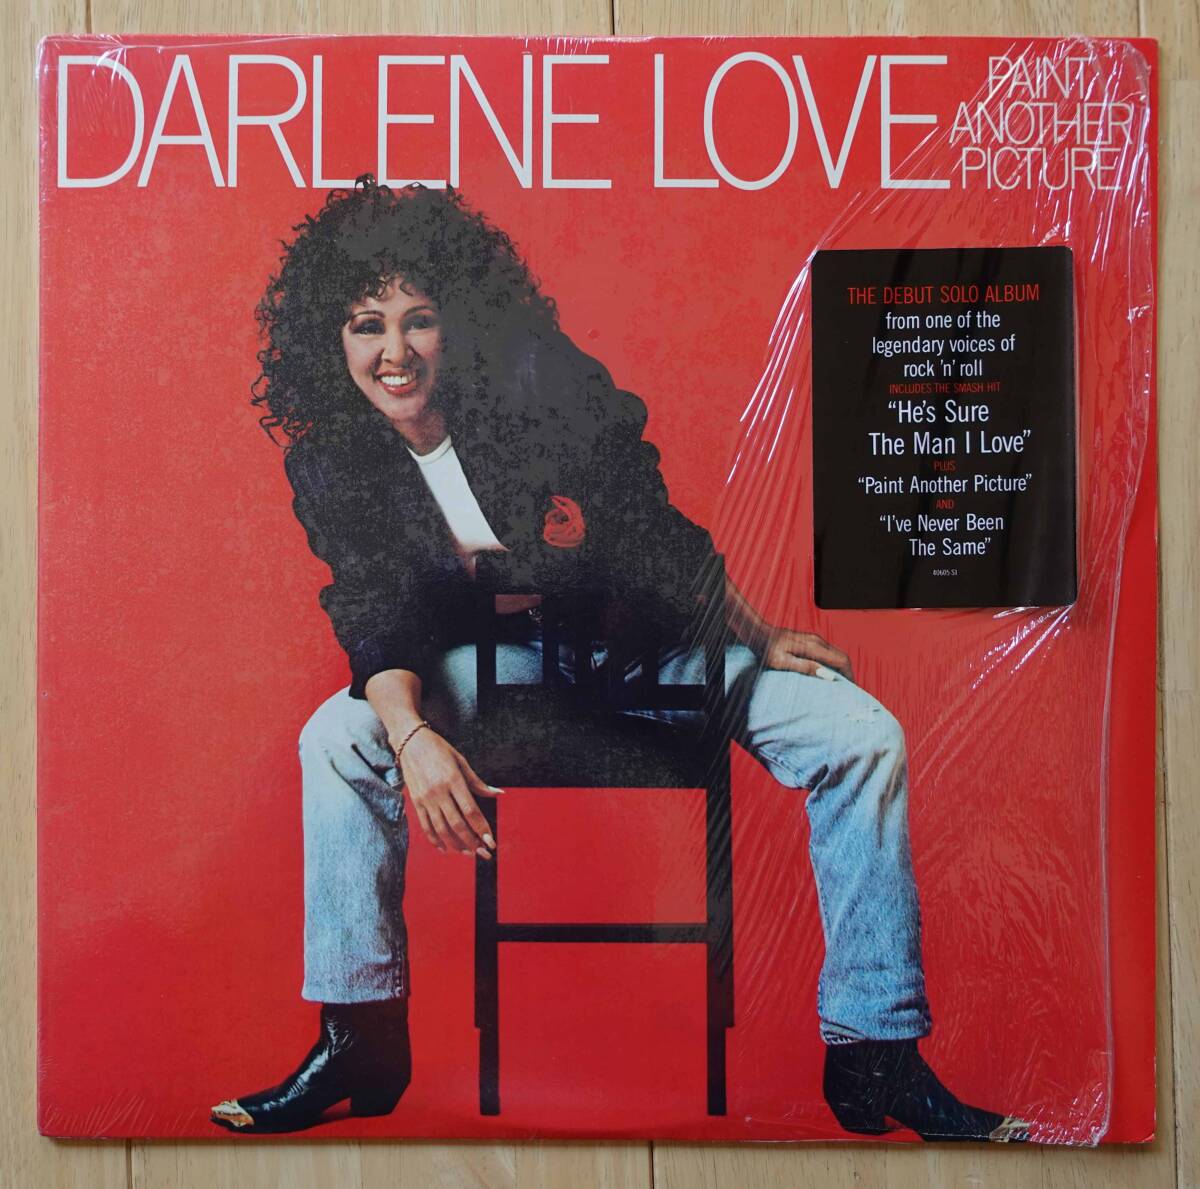 Darlene Love（ダーレン・ラヴ）LP「Paint Another Picture」US盤 FC 40605 シュリンク付き 新品同様 20 Feet from Stardom_画像1